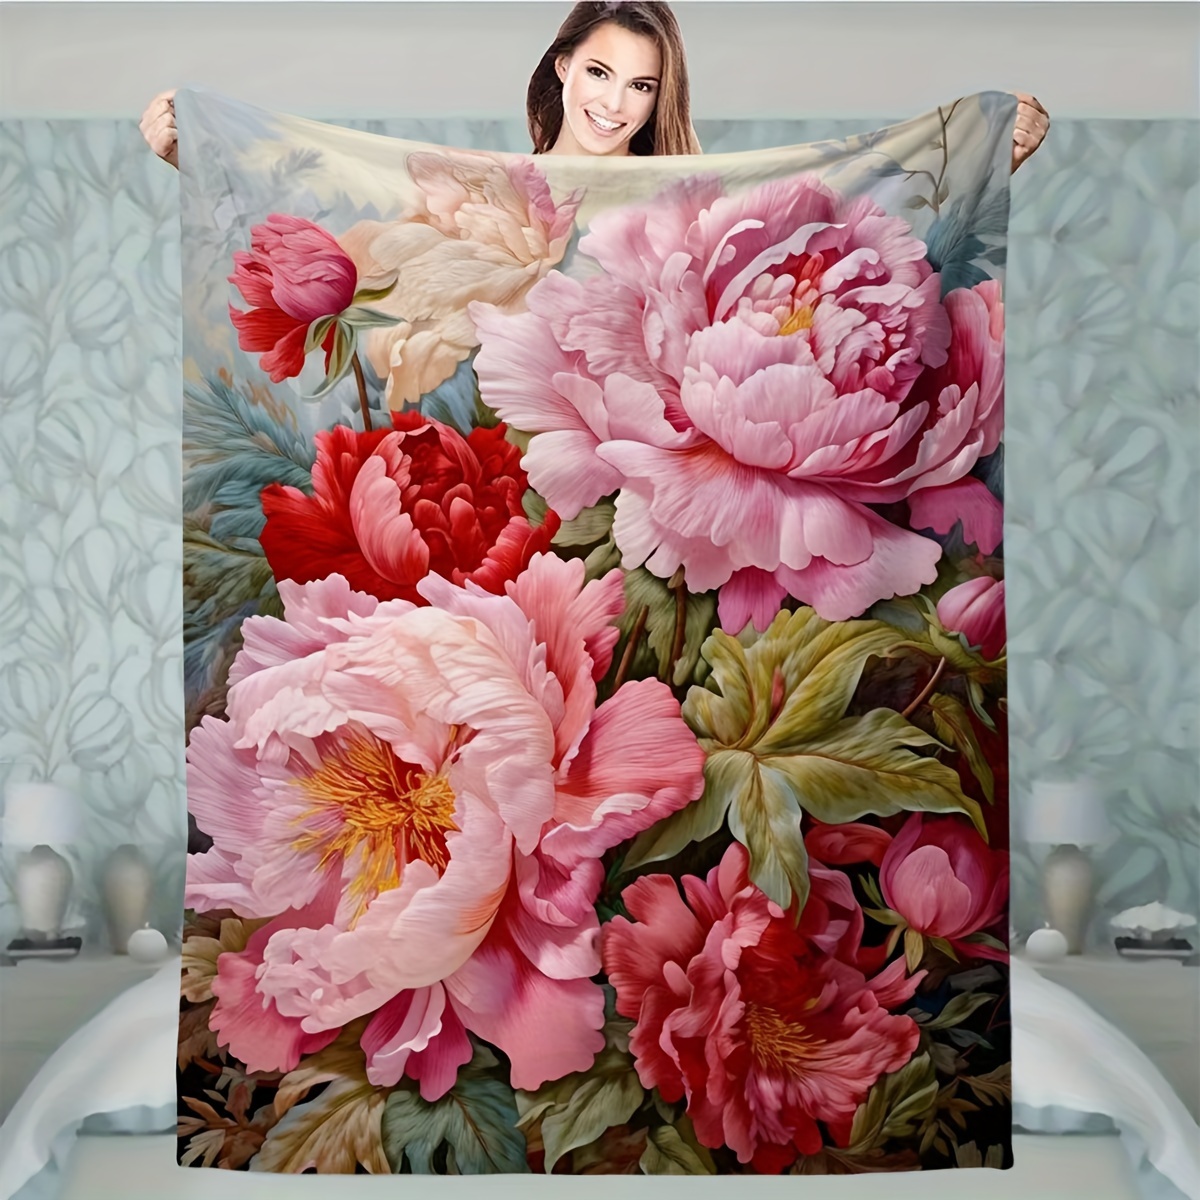 

Glam Style Floral Throw Blanket - All Season Stain Resistant Polyester Knitted Bedding With Flower Pattern - Multipurpose Soft Comfortable Sofa Decorative Cover With Unique Embellishment Features